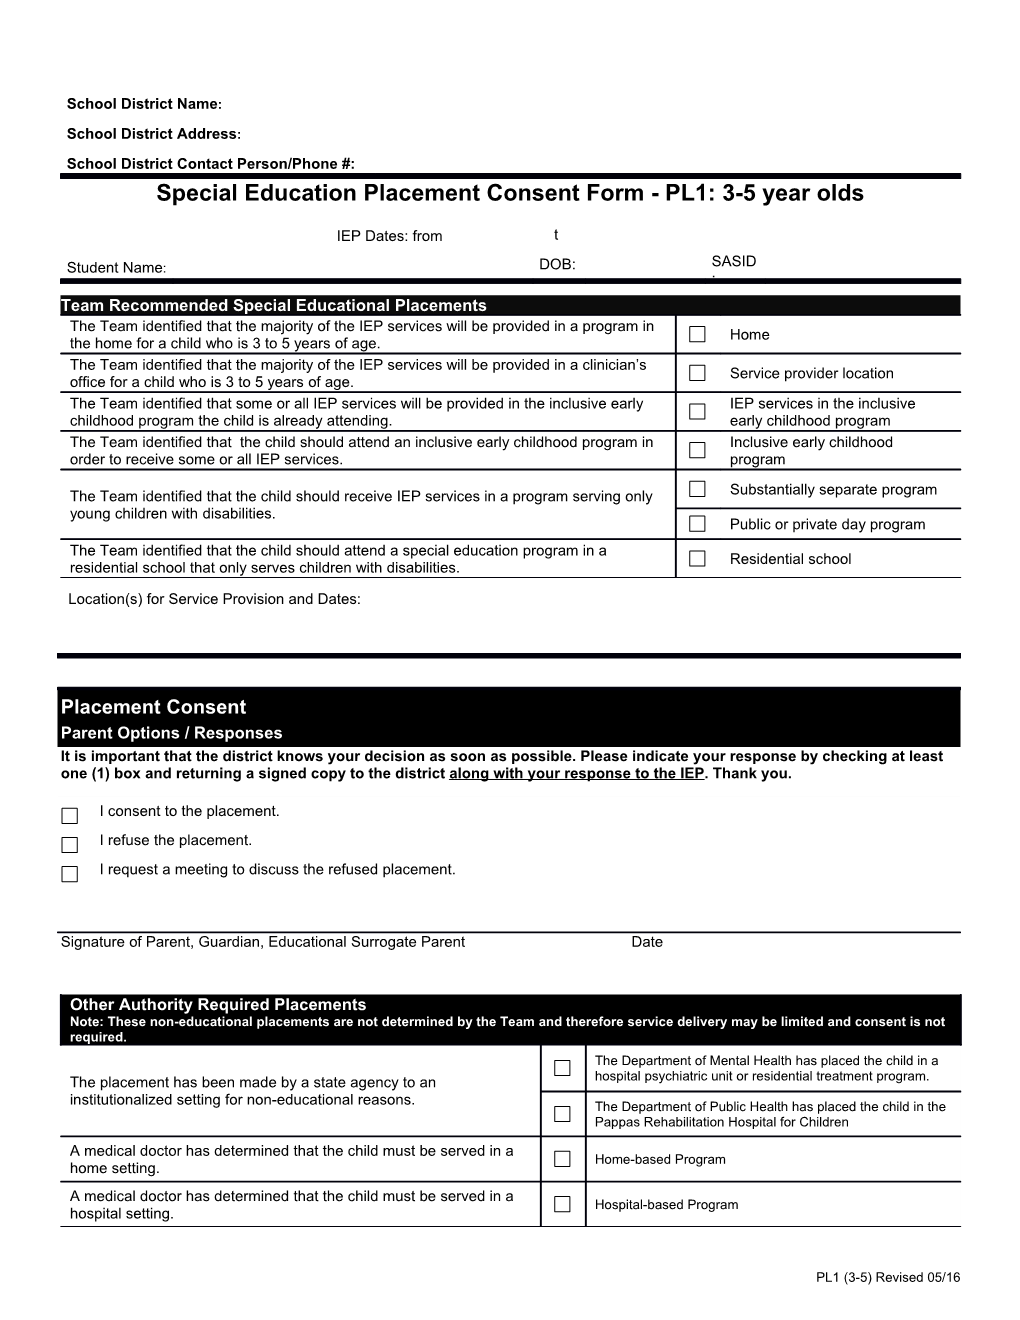 Placement Consent Form - PL1: 3-5 Year Olds